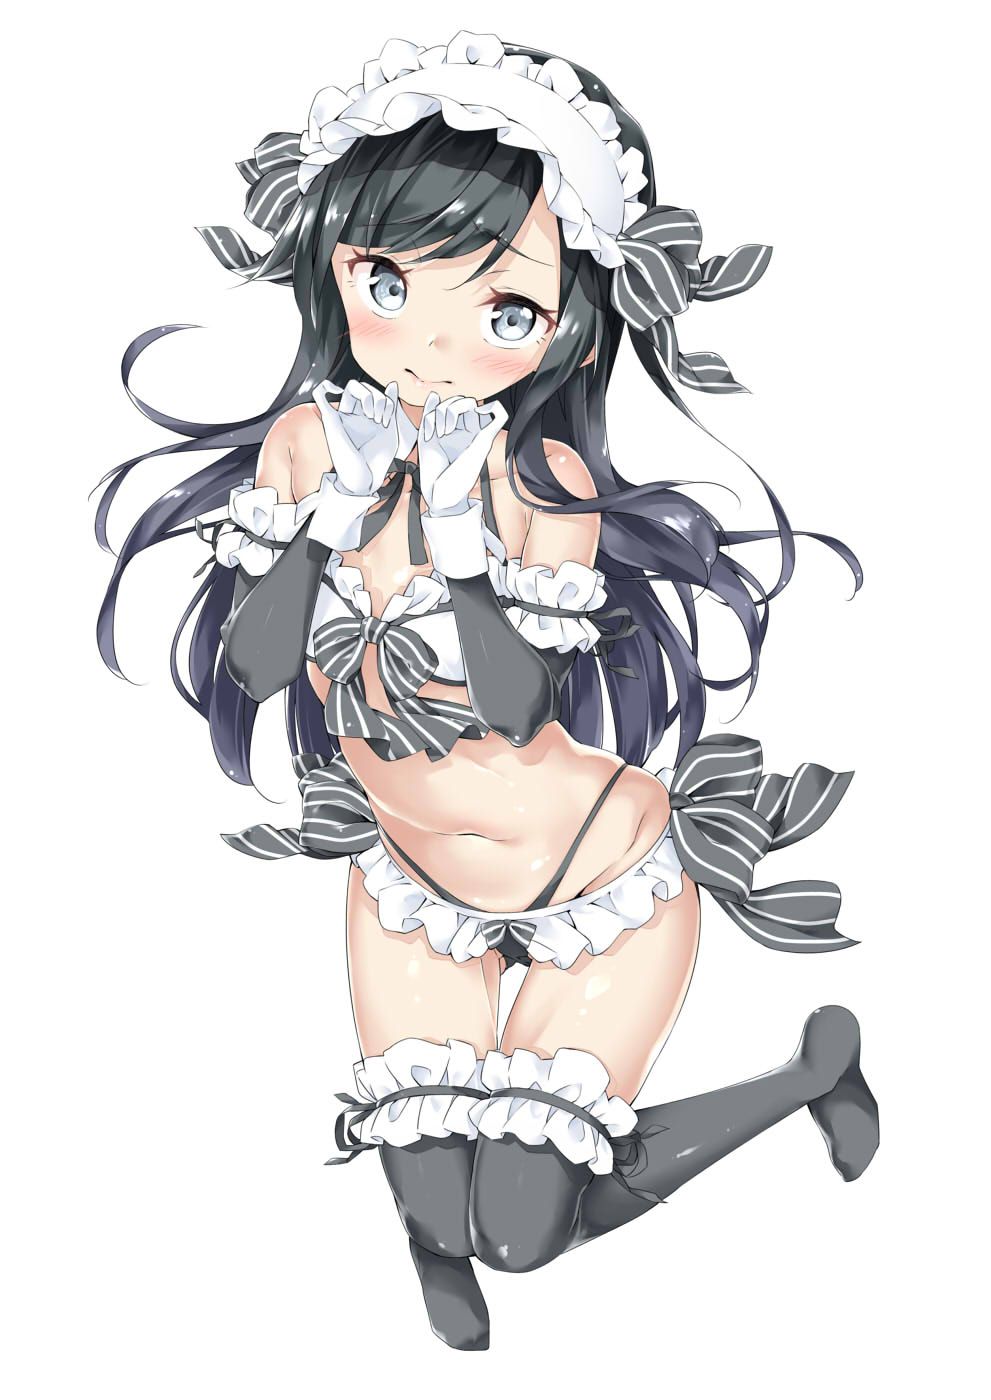 [Secondary, ZIP] pretty serious ship it together images of asashio 100 56